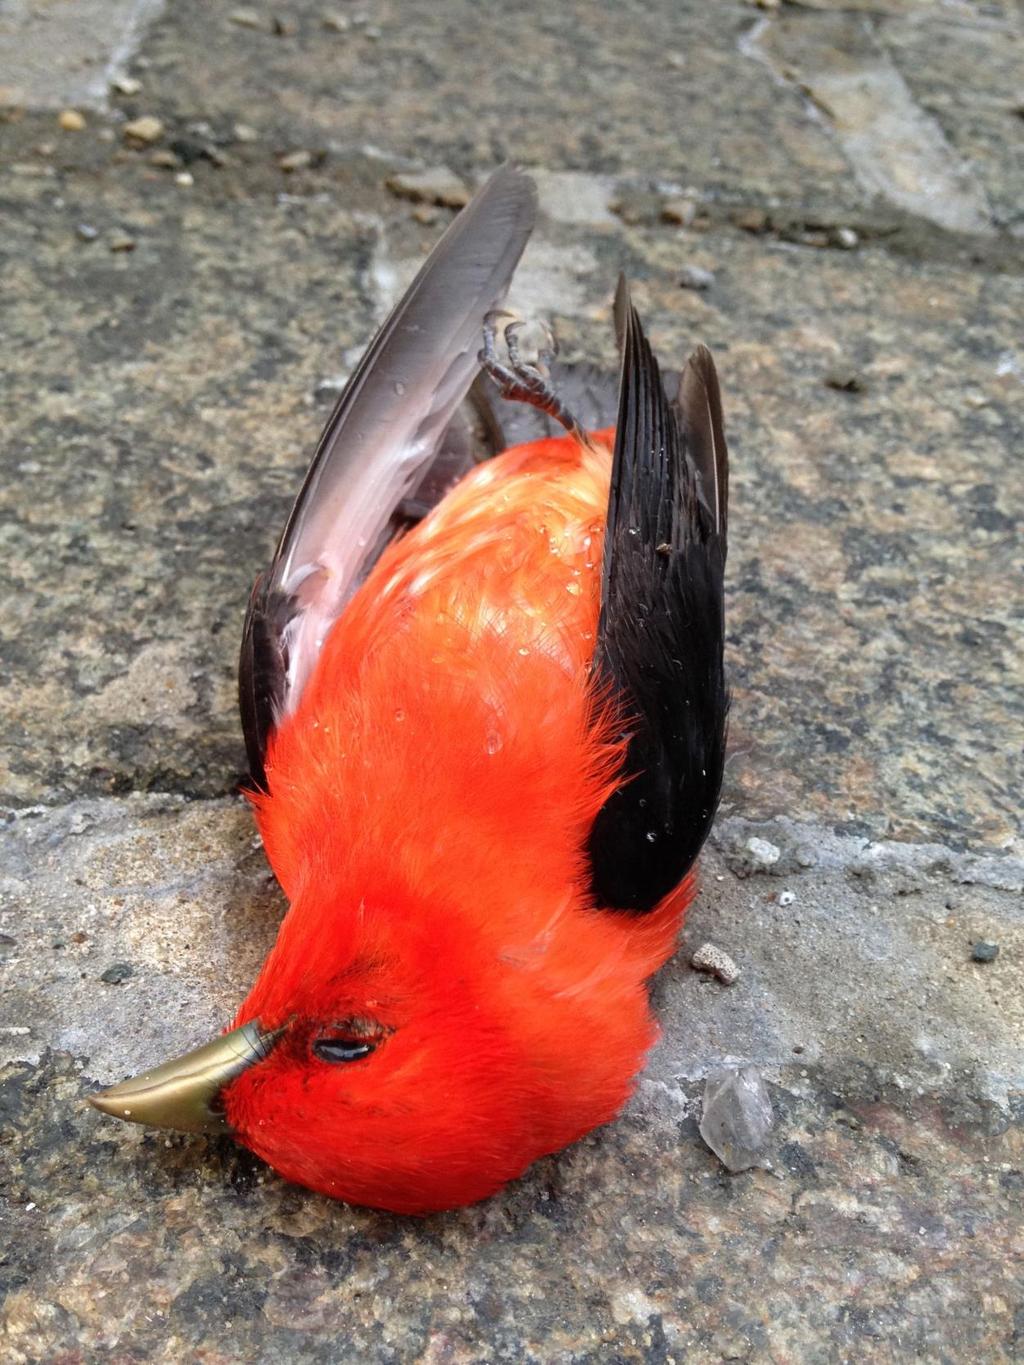 A Scarlet Tanager window strike found by the